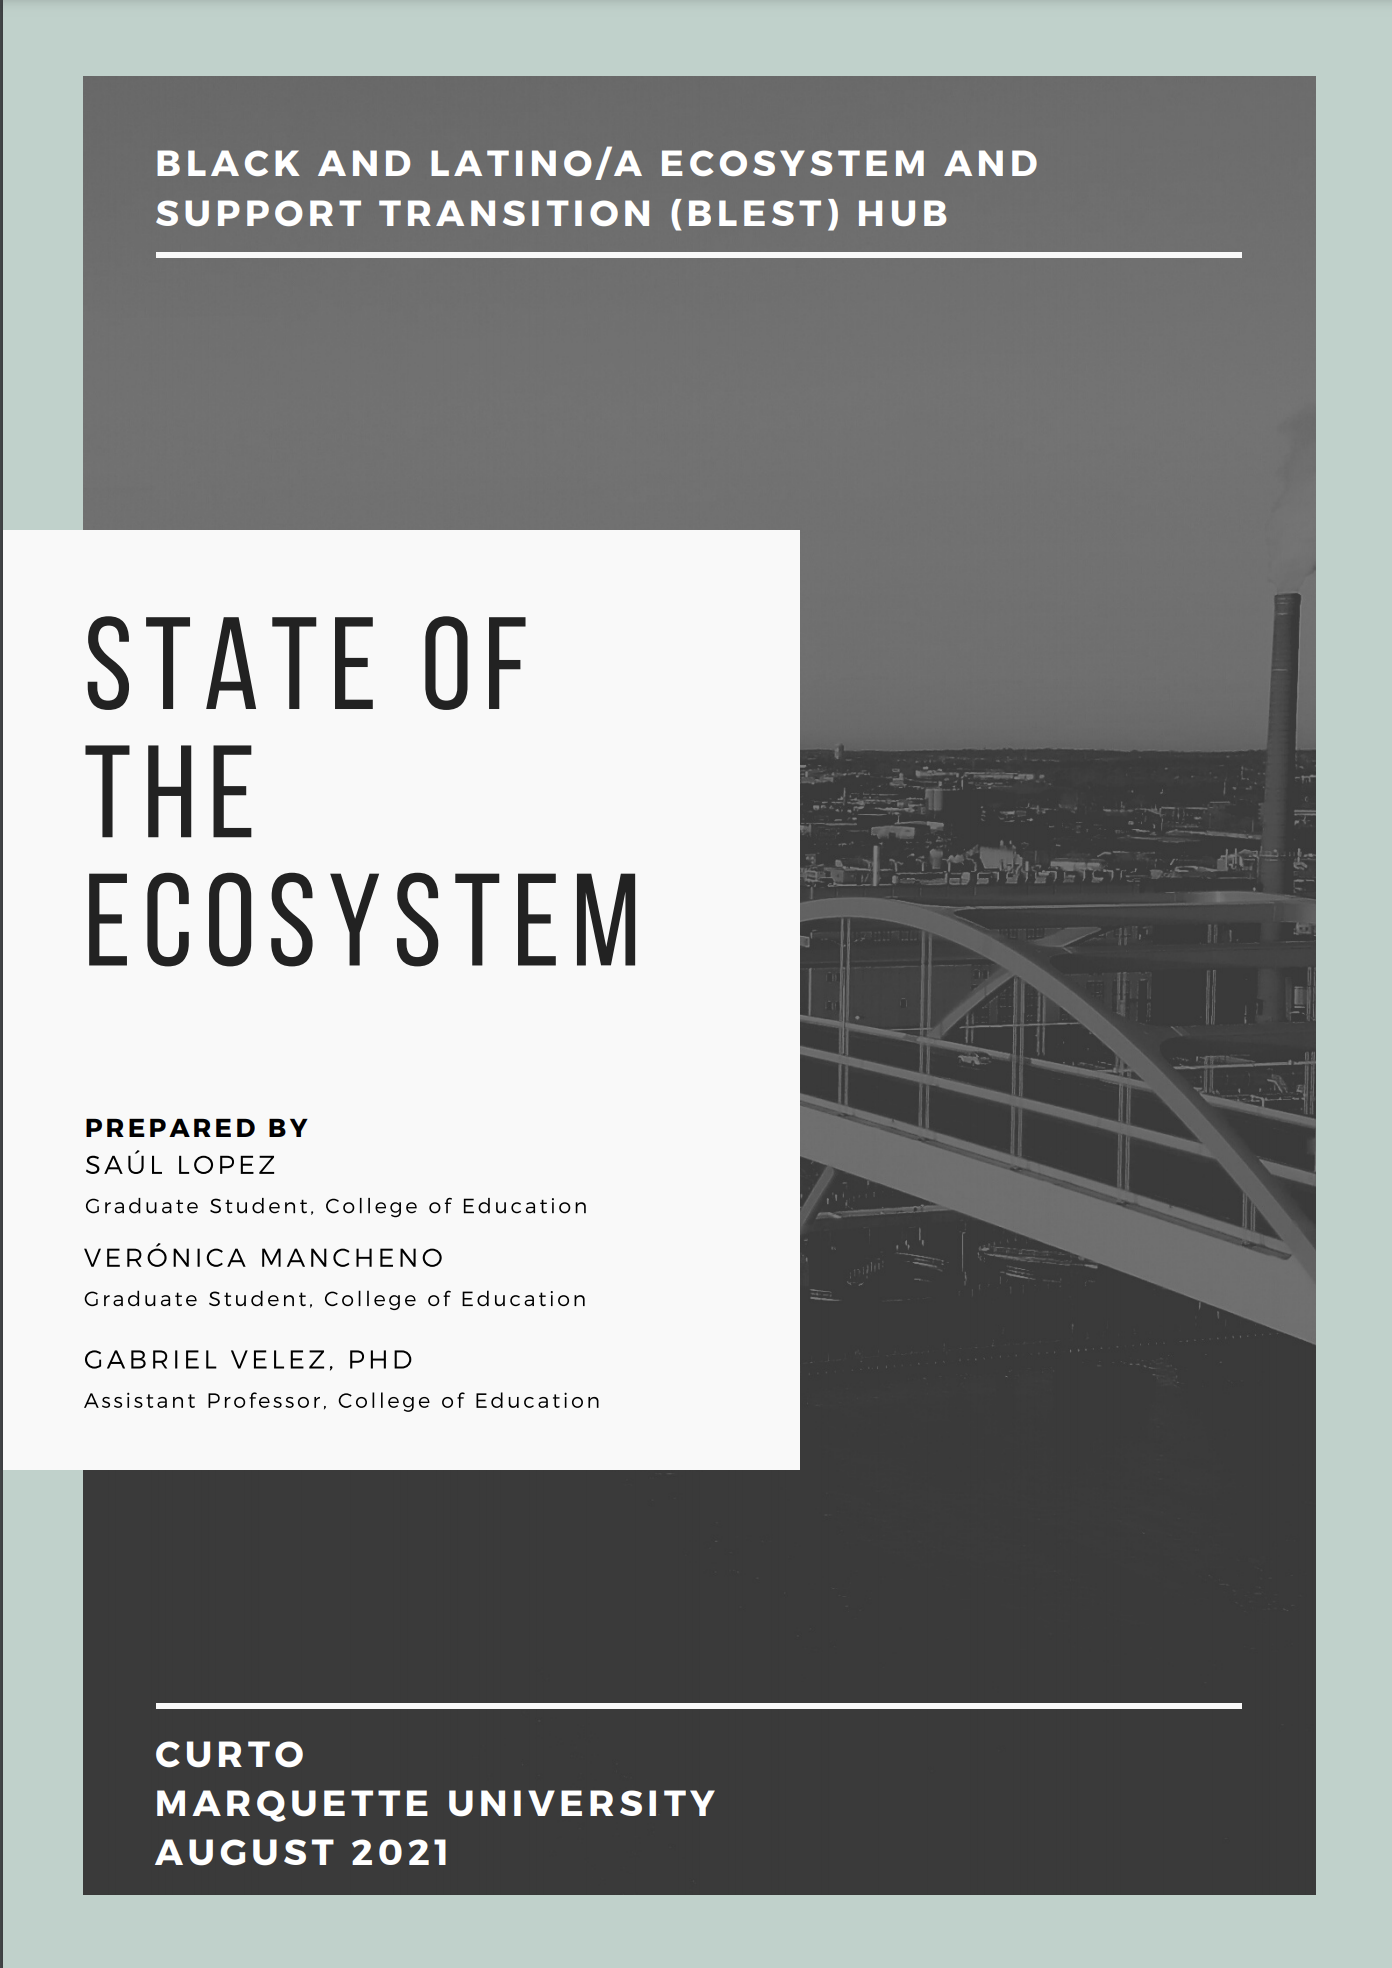 "State of the Ecosystem" cover